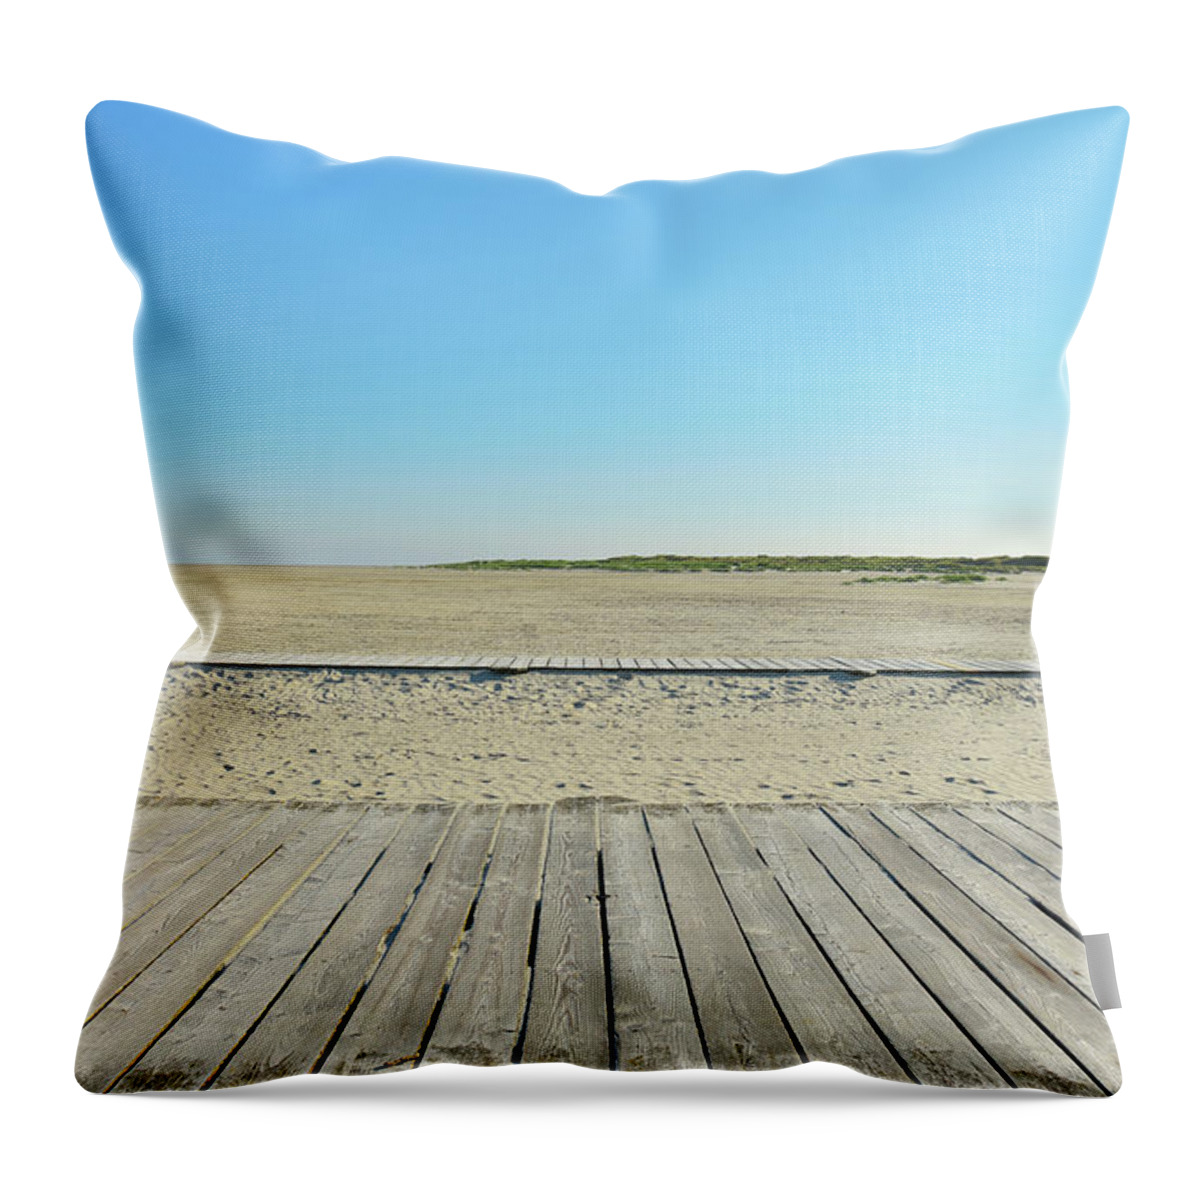 North Sea Throw Pillow featuring the photograph Wooden Floorboards On Beach Path by Raimund Linke